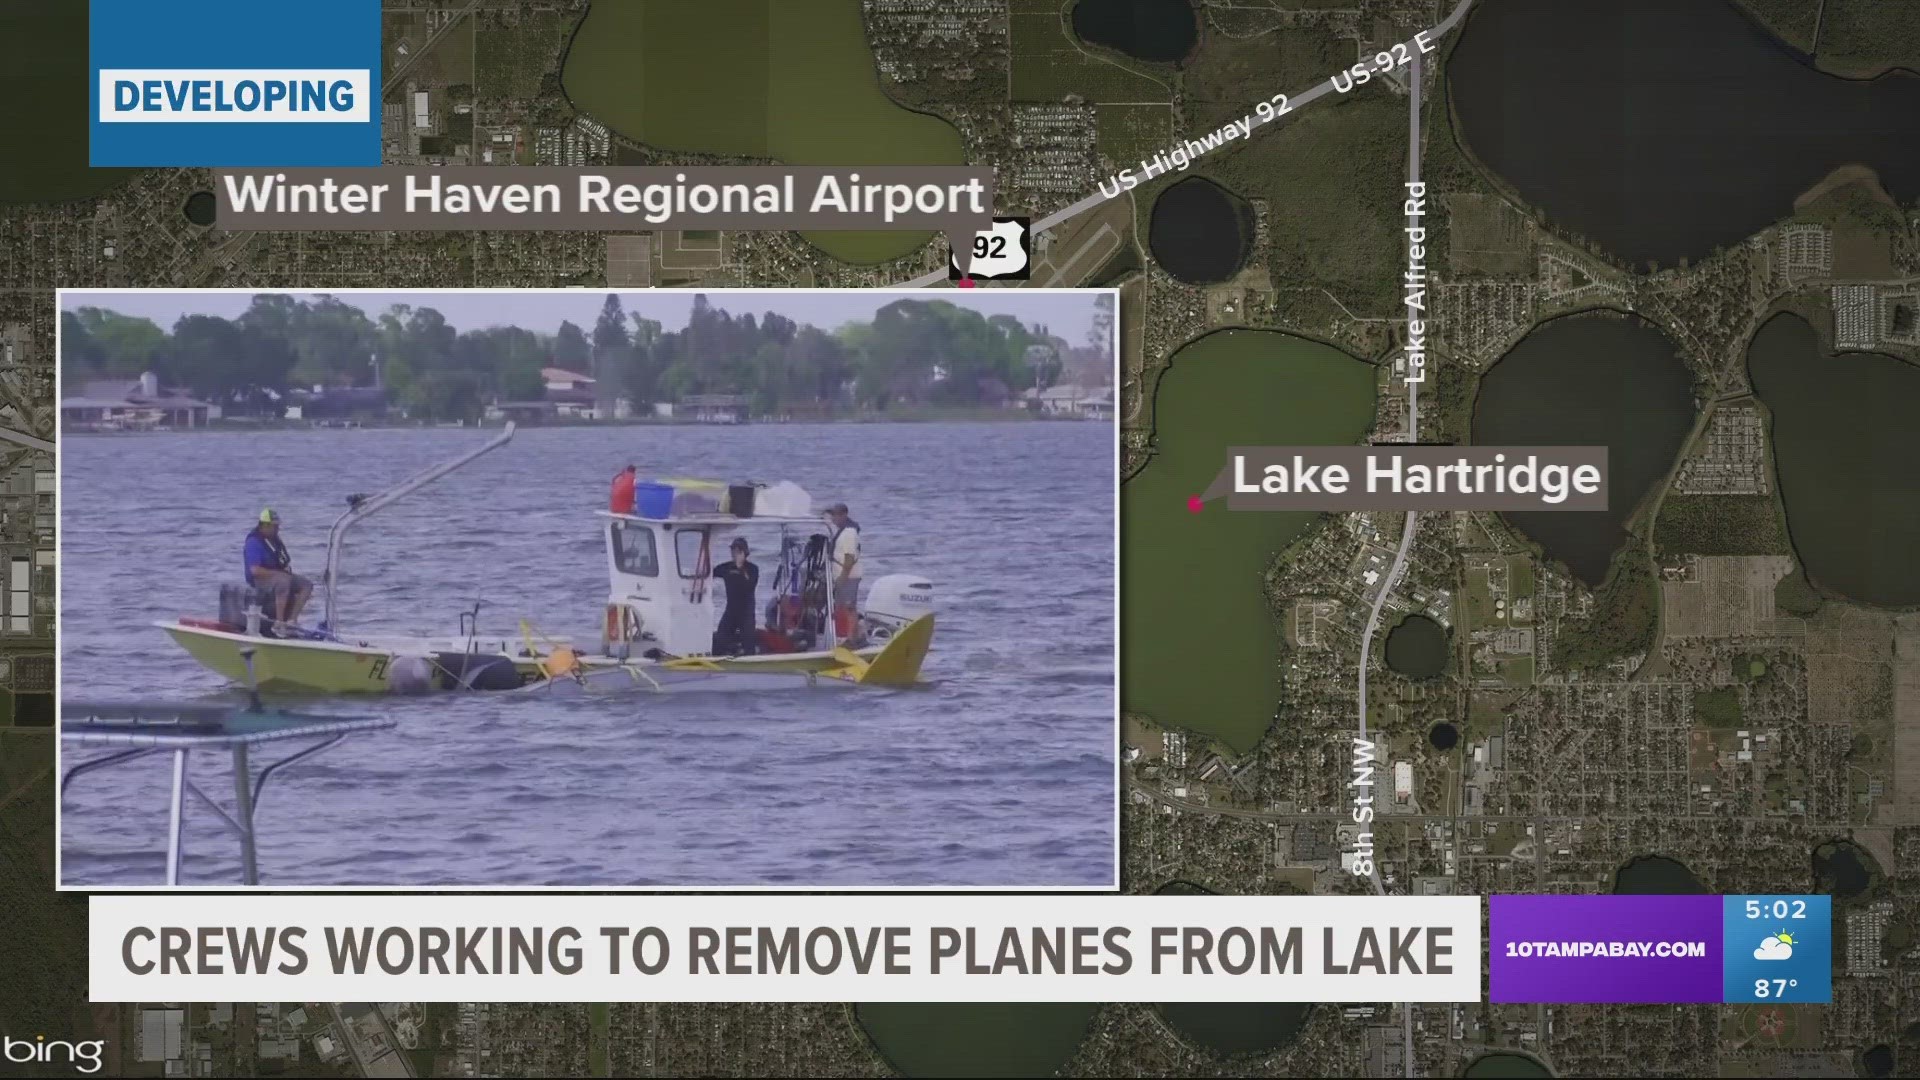 One of the planes in the crash was 21 feet underwater in Lake Hartridge.